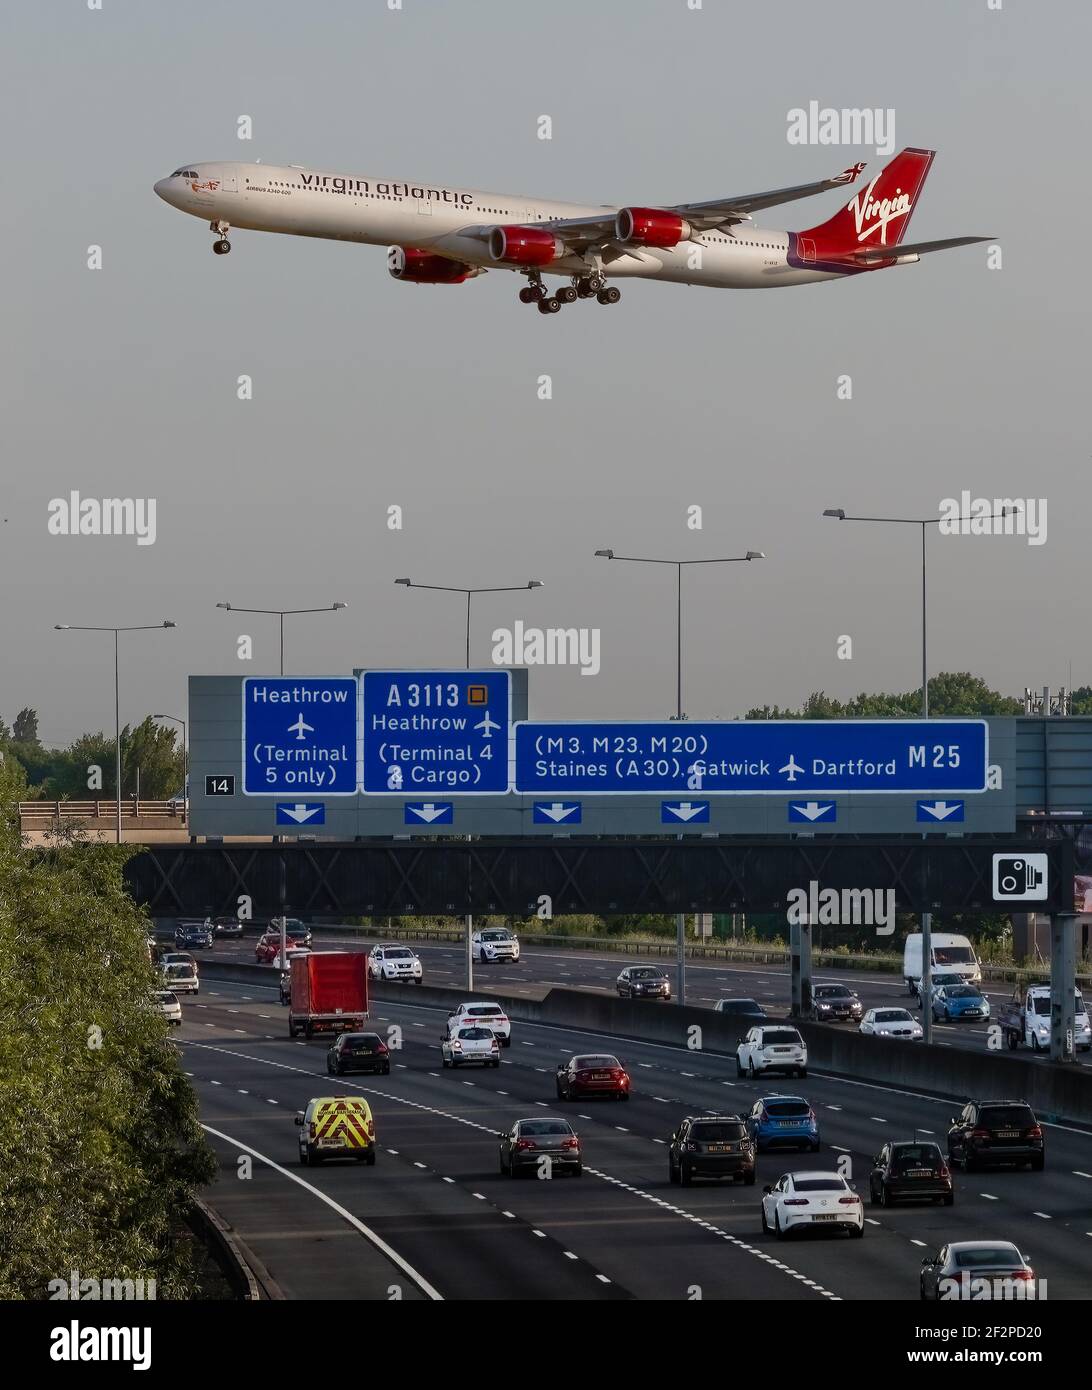 London Heathrow, UK, June 2019. Virgin Atlantic Airbus A340 flying over the busy M25 Motorway Gantry and road signs whilst fast moving road traffic fl Stock Photo